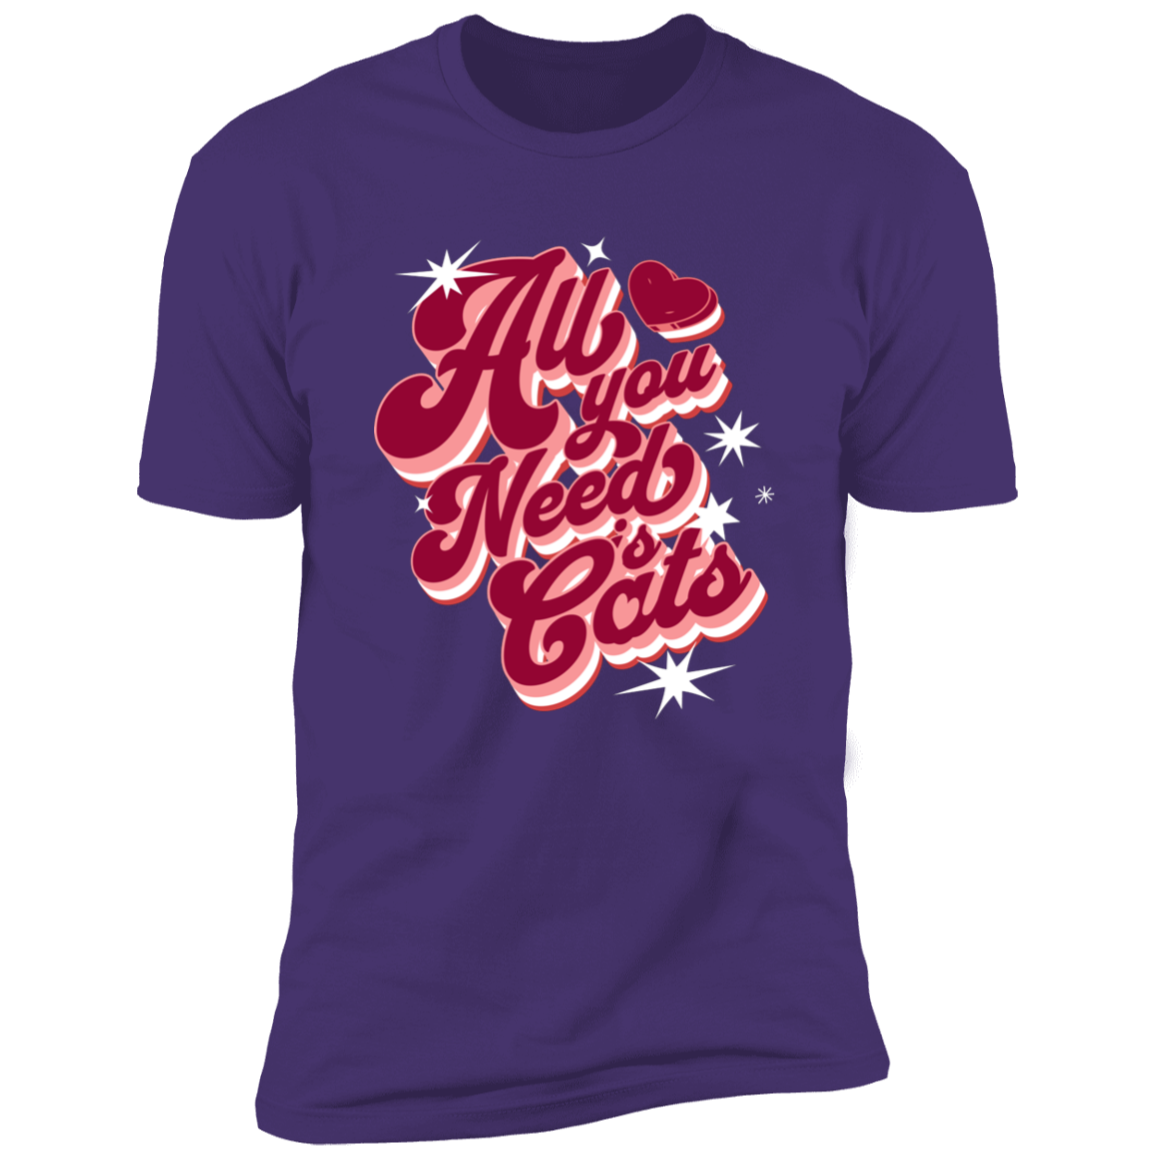 All I Need is Cats T-shirt, Cat Shirt for humans, in purple rush